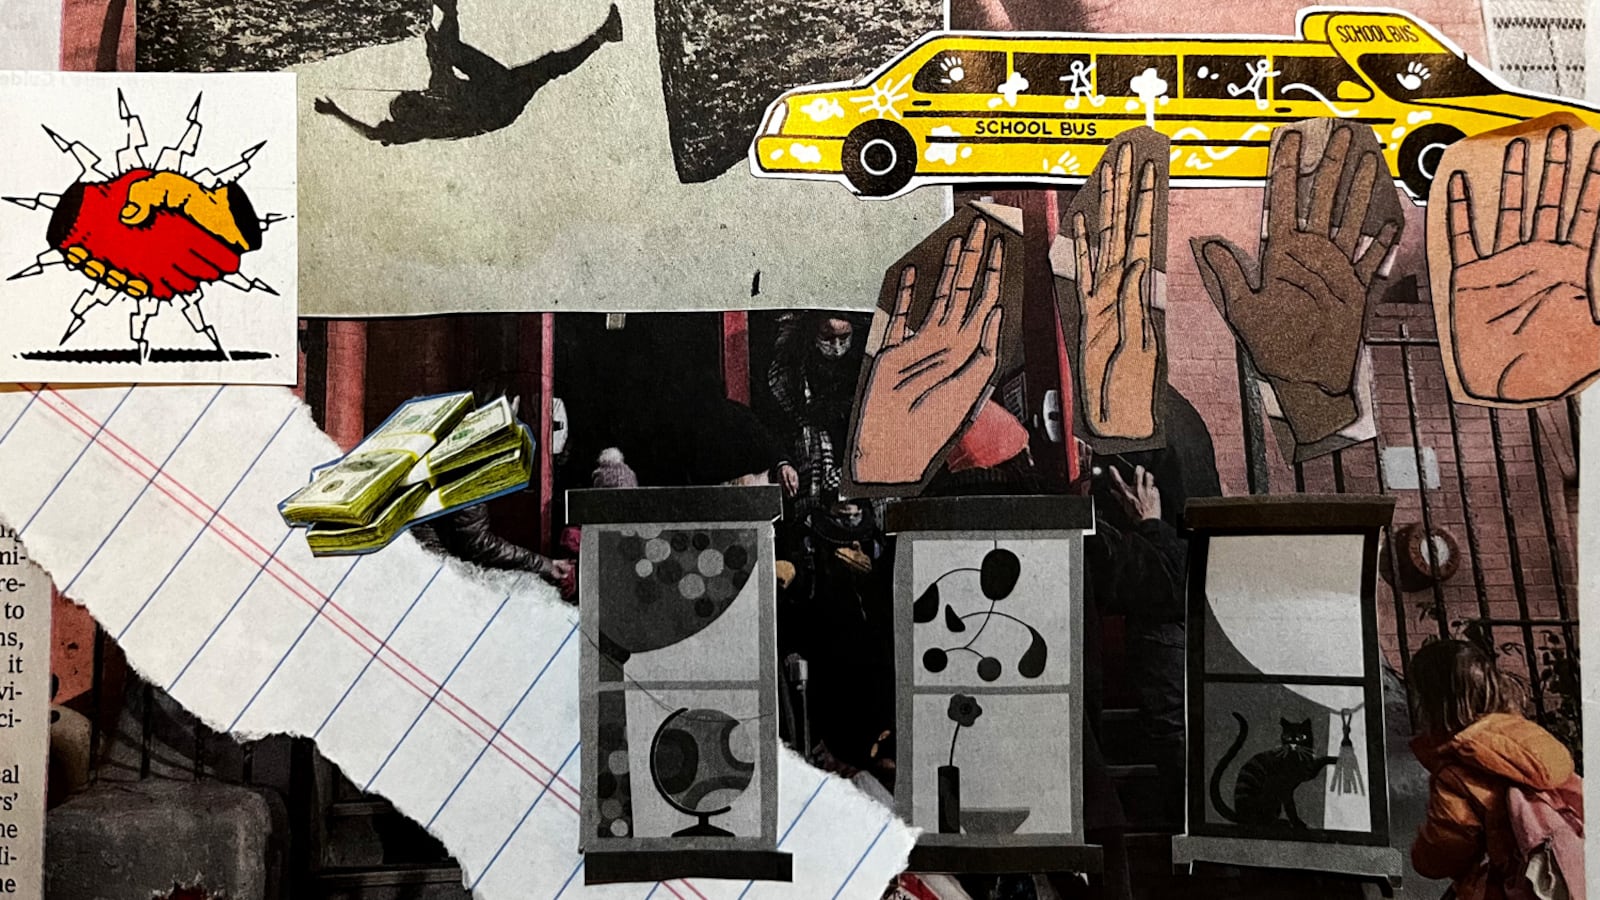 A several-illustration collage with student’s raised hands, school buses, notebook paper, and money, among other drawings.